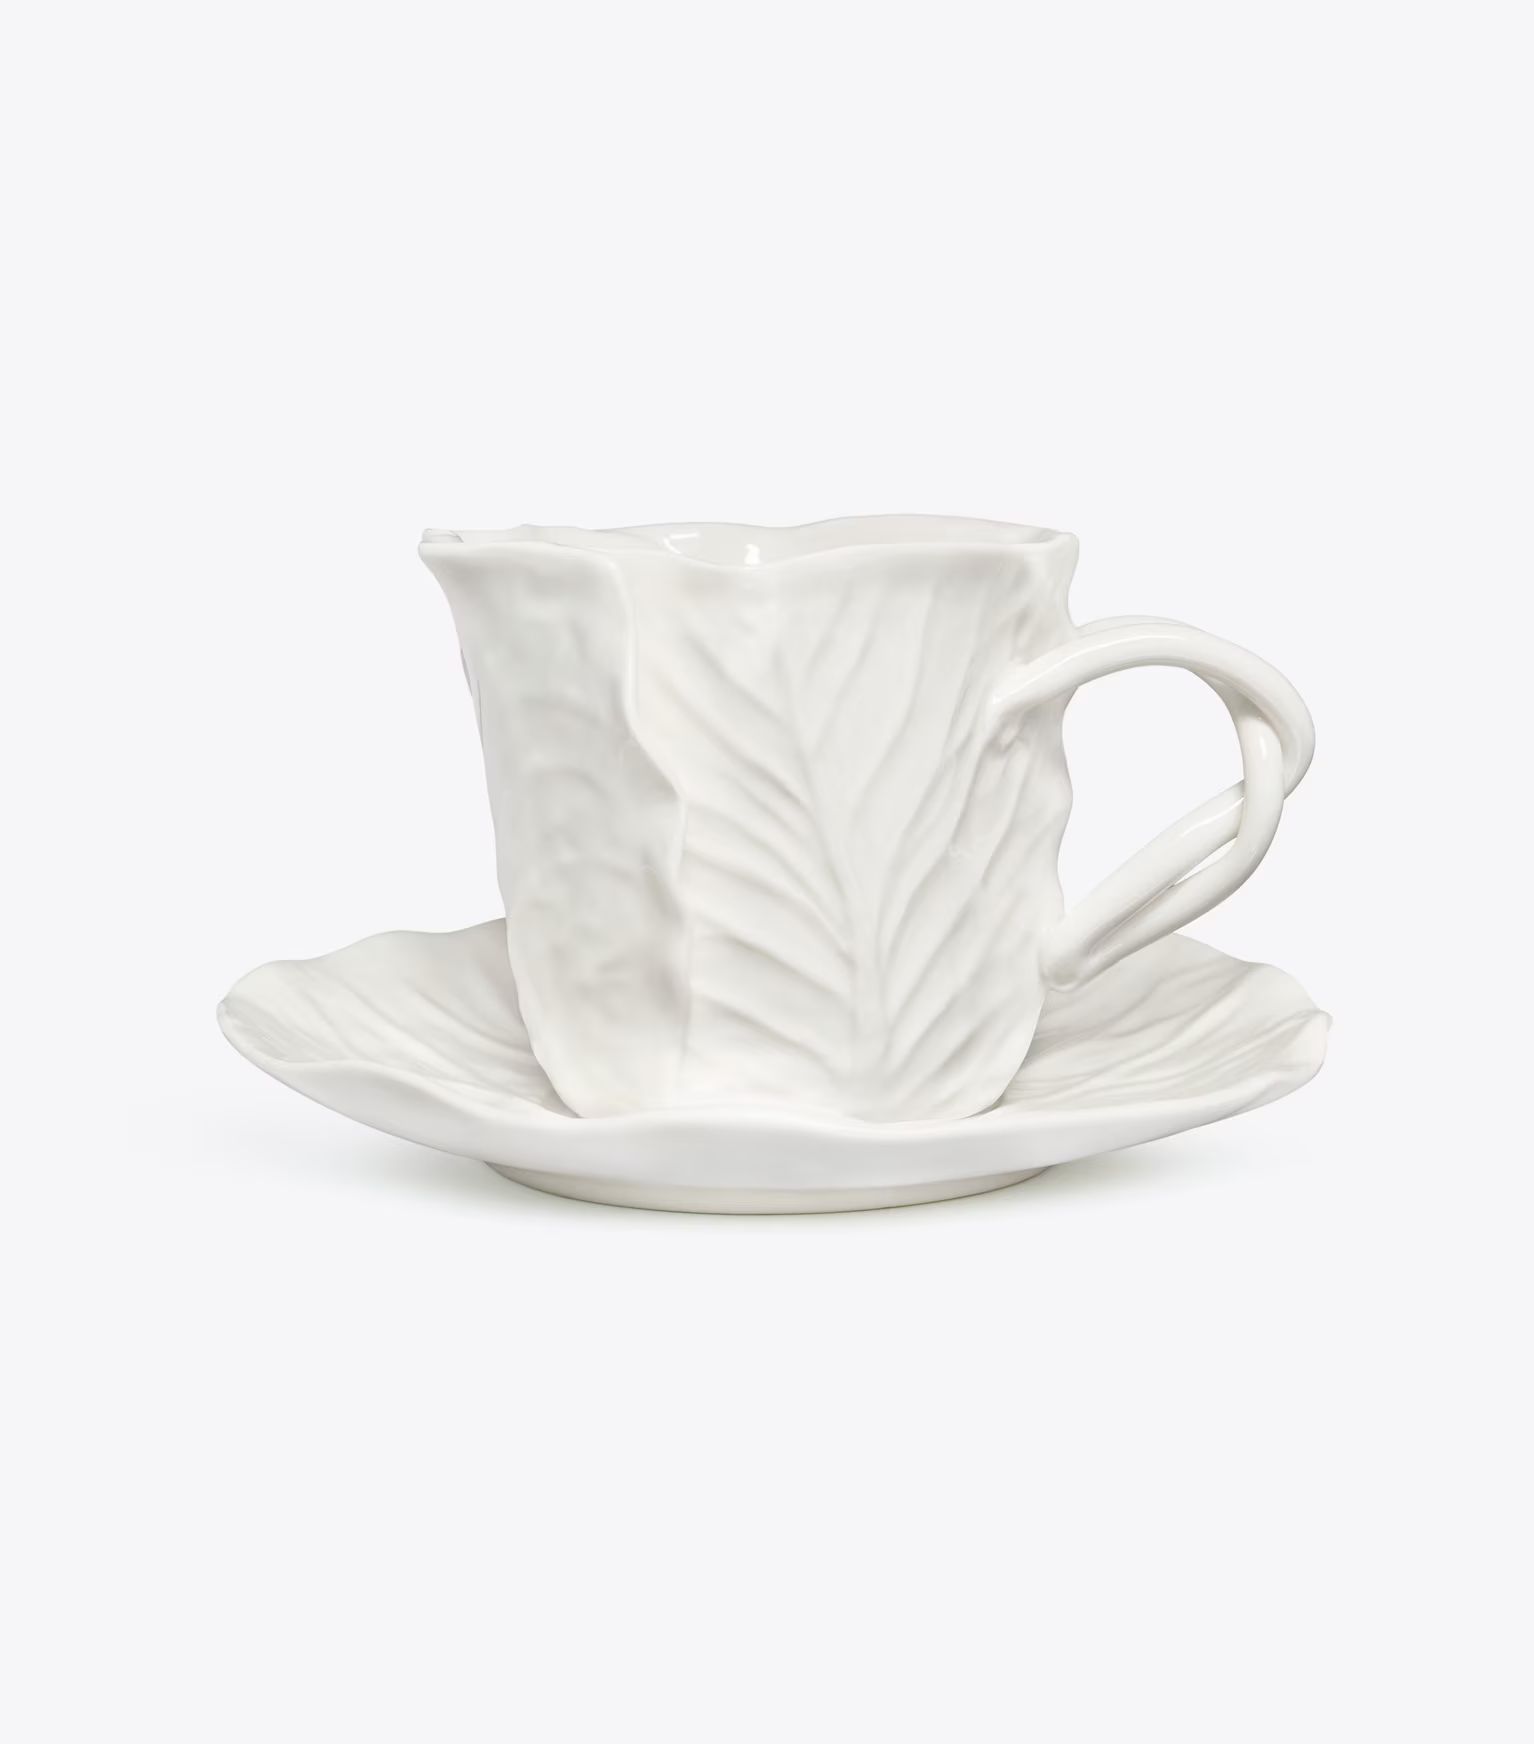 LETTUCE WARE CUP & SAUCER, SET OF 2 | Tory Burch (US)